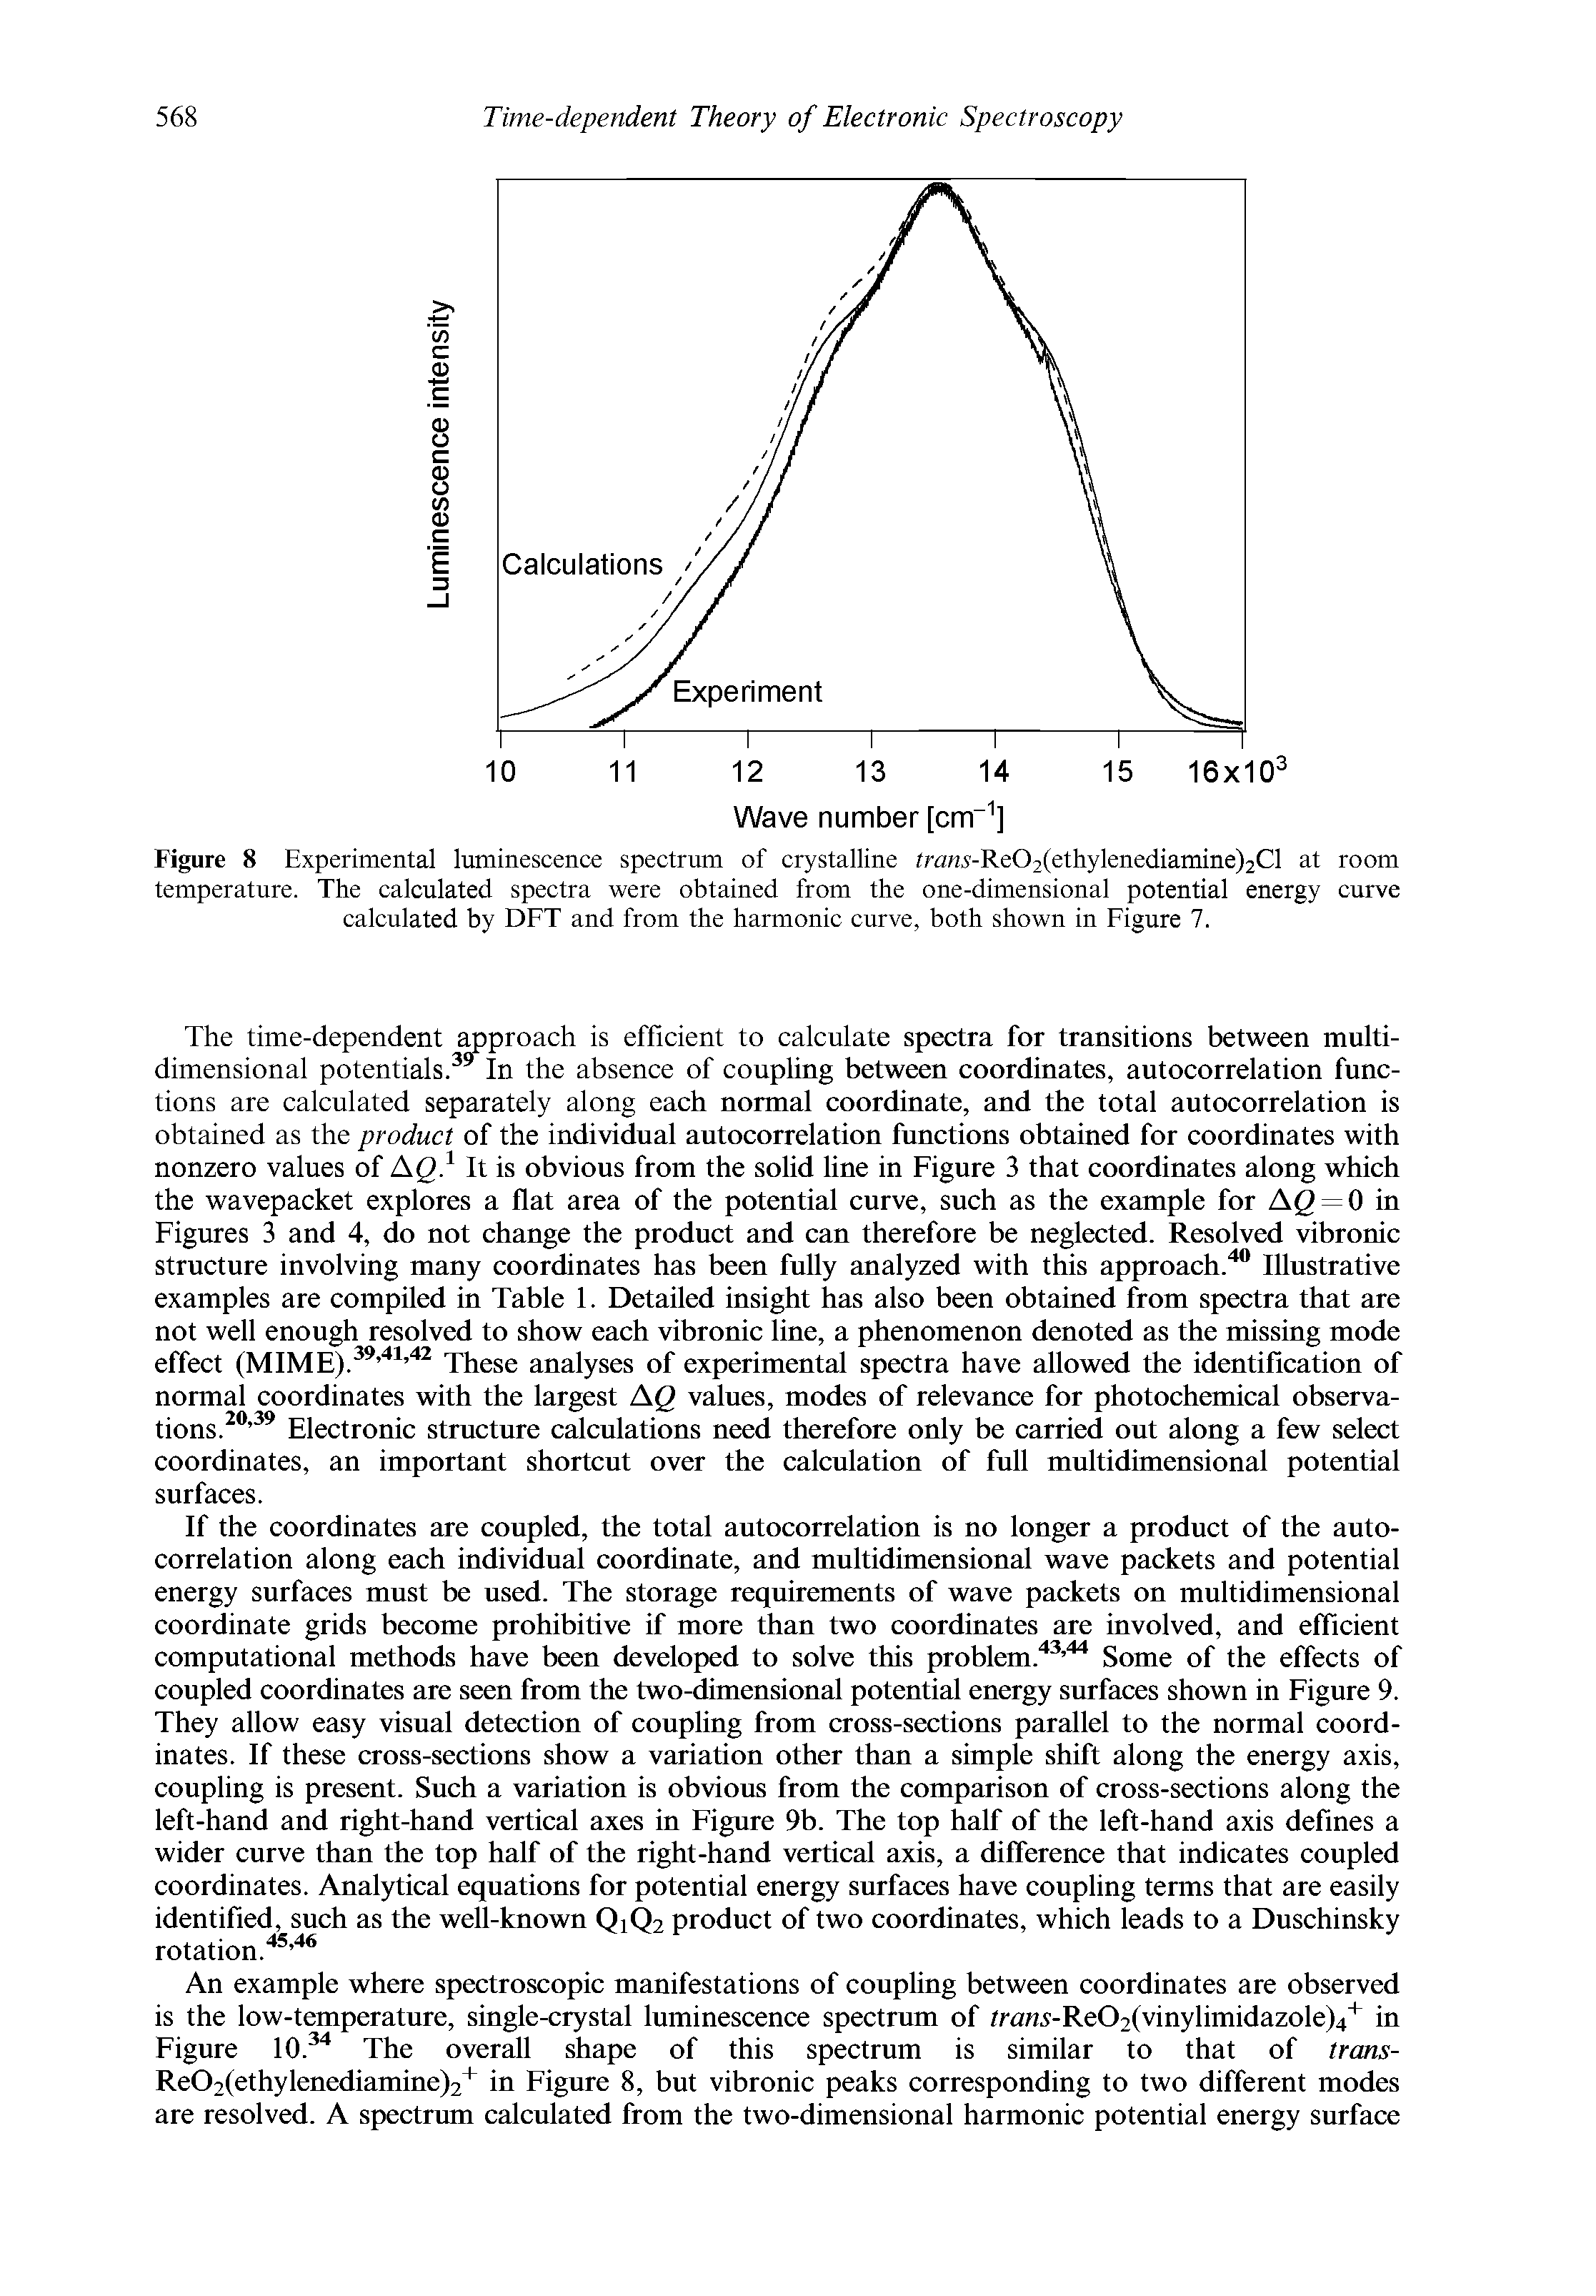 Figure 8 Experimental luminescence spectrum of crystalline fraw5-Re02(ethylenediamine)2Cl at room temperature. The calculated spectra were obtained from the one-dimensional potential energy curve calculated by DFT and from the harmonic curve, both shown in Figure 7.